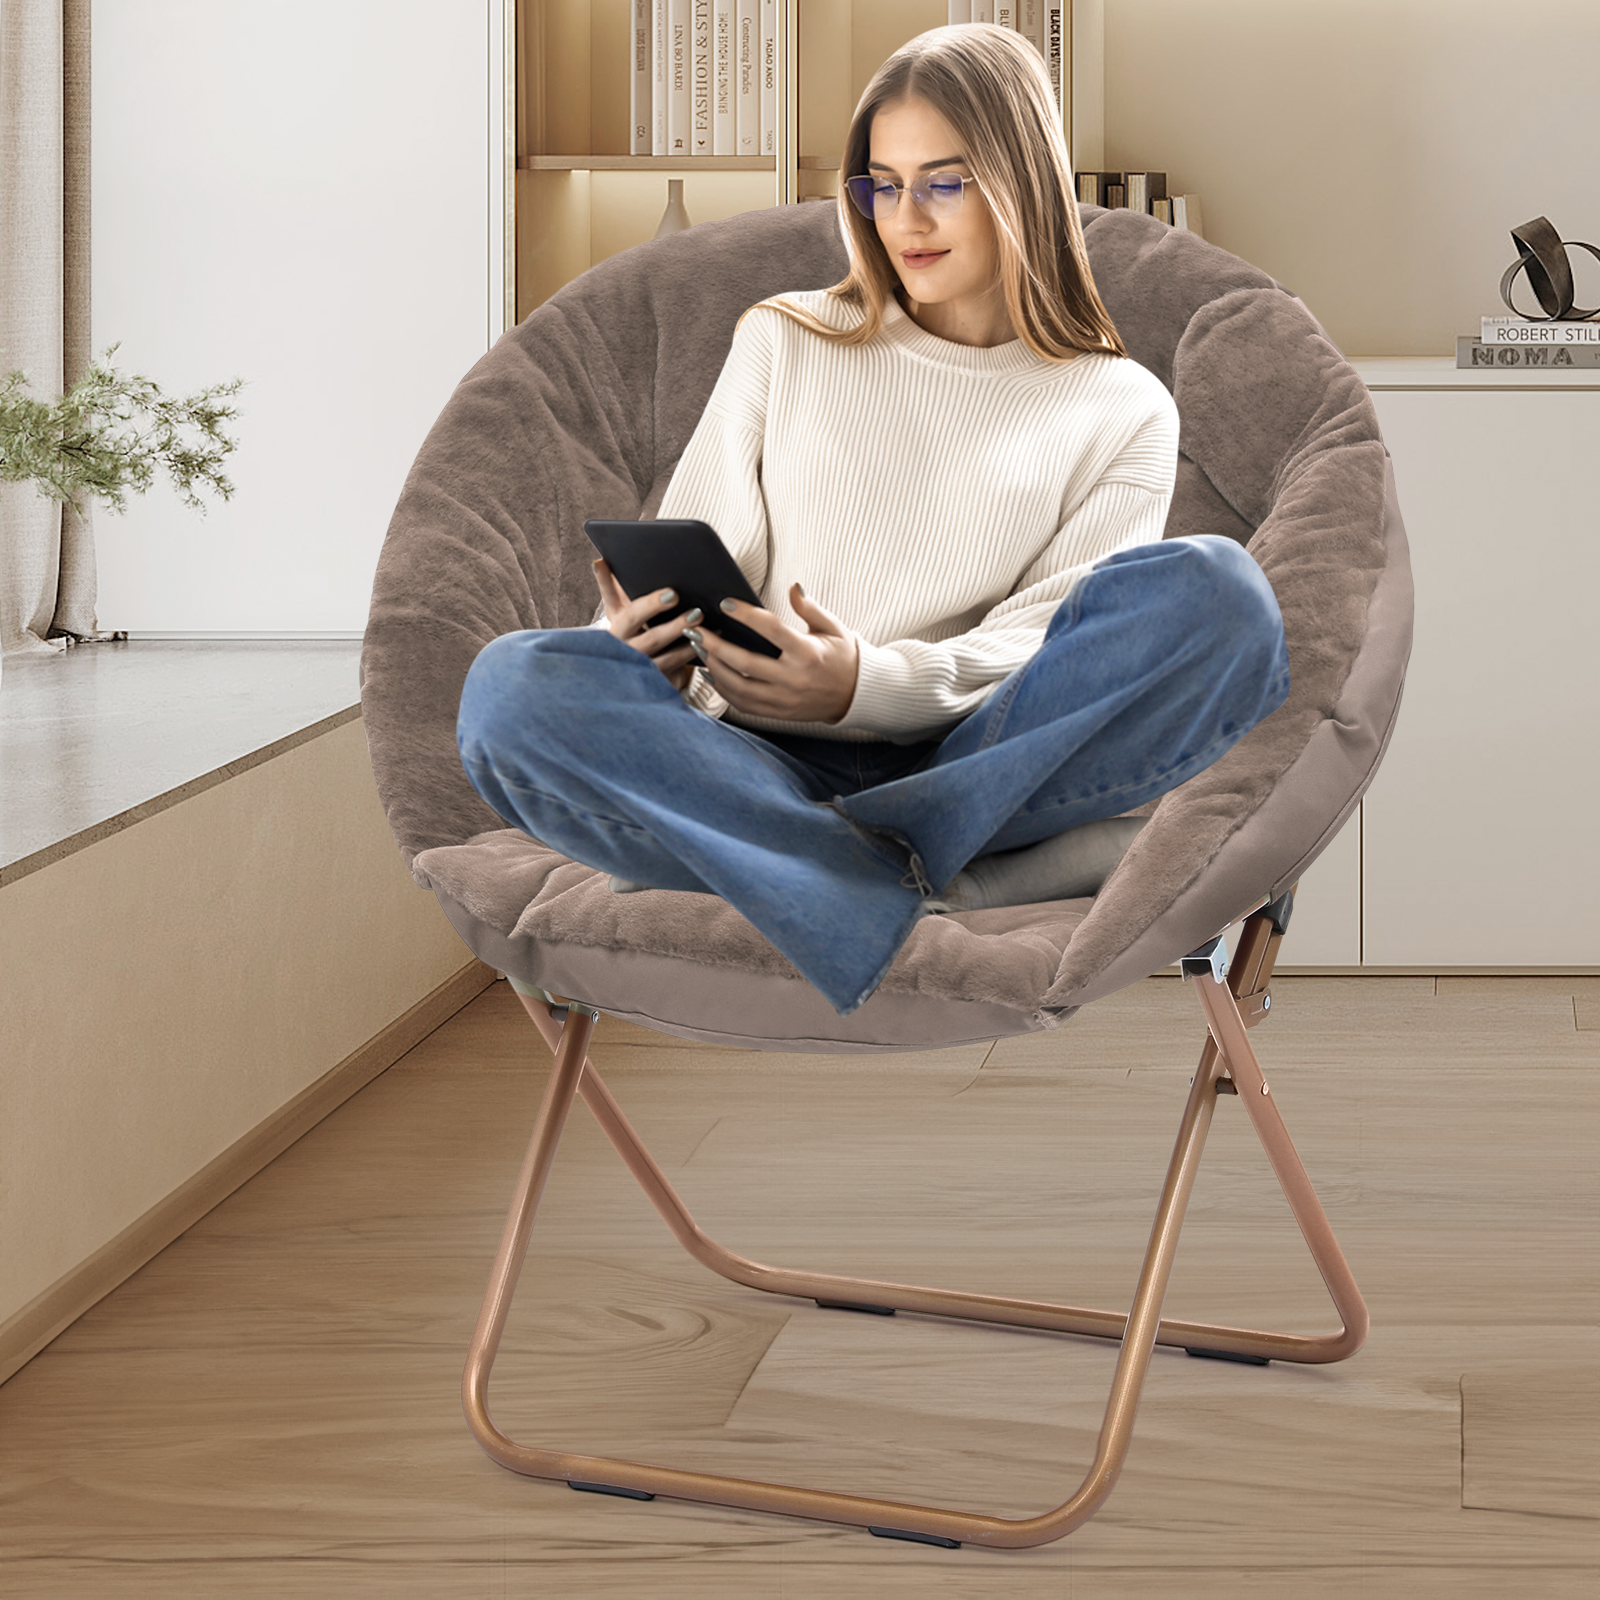 Magshion Comfy Saucer Chair, Foldable Faux Fur Lounge Chair for Bedroom Living Room, Cozy Moon Chair with Metal Frame for Adults, X-Large, Beige - image 4 of 10